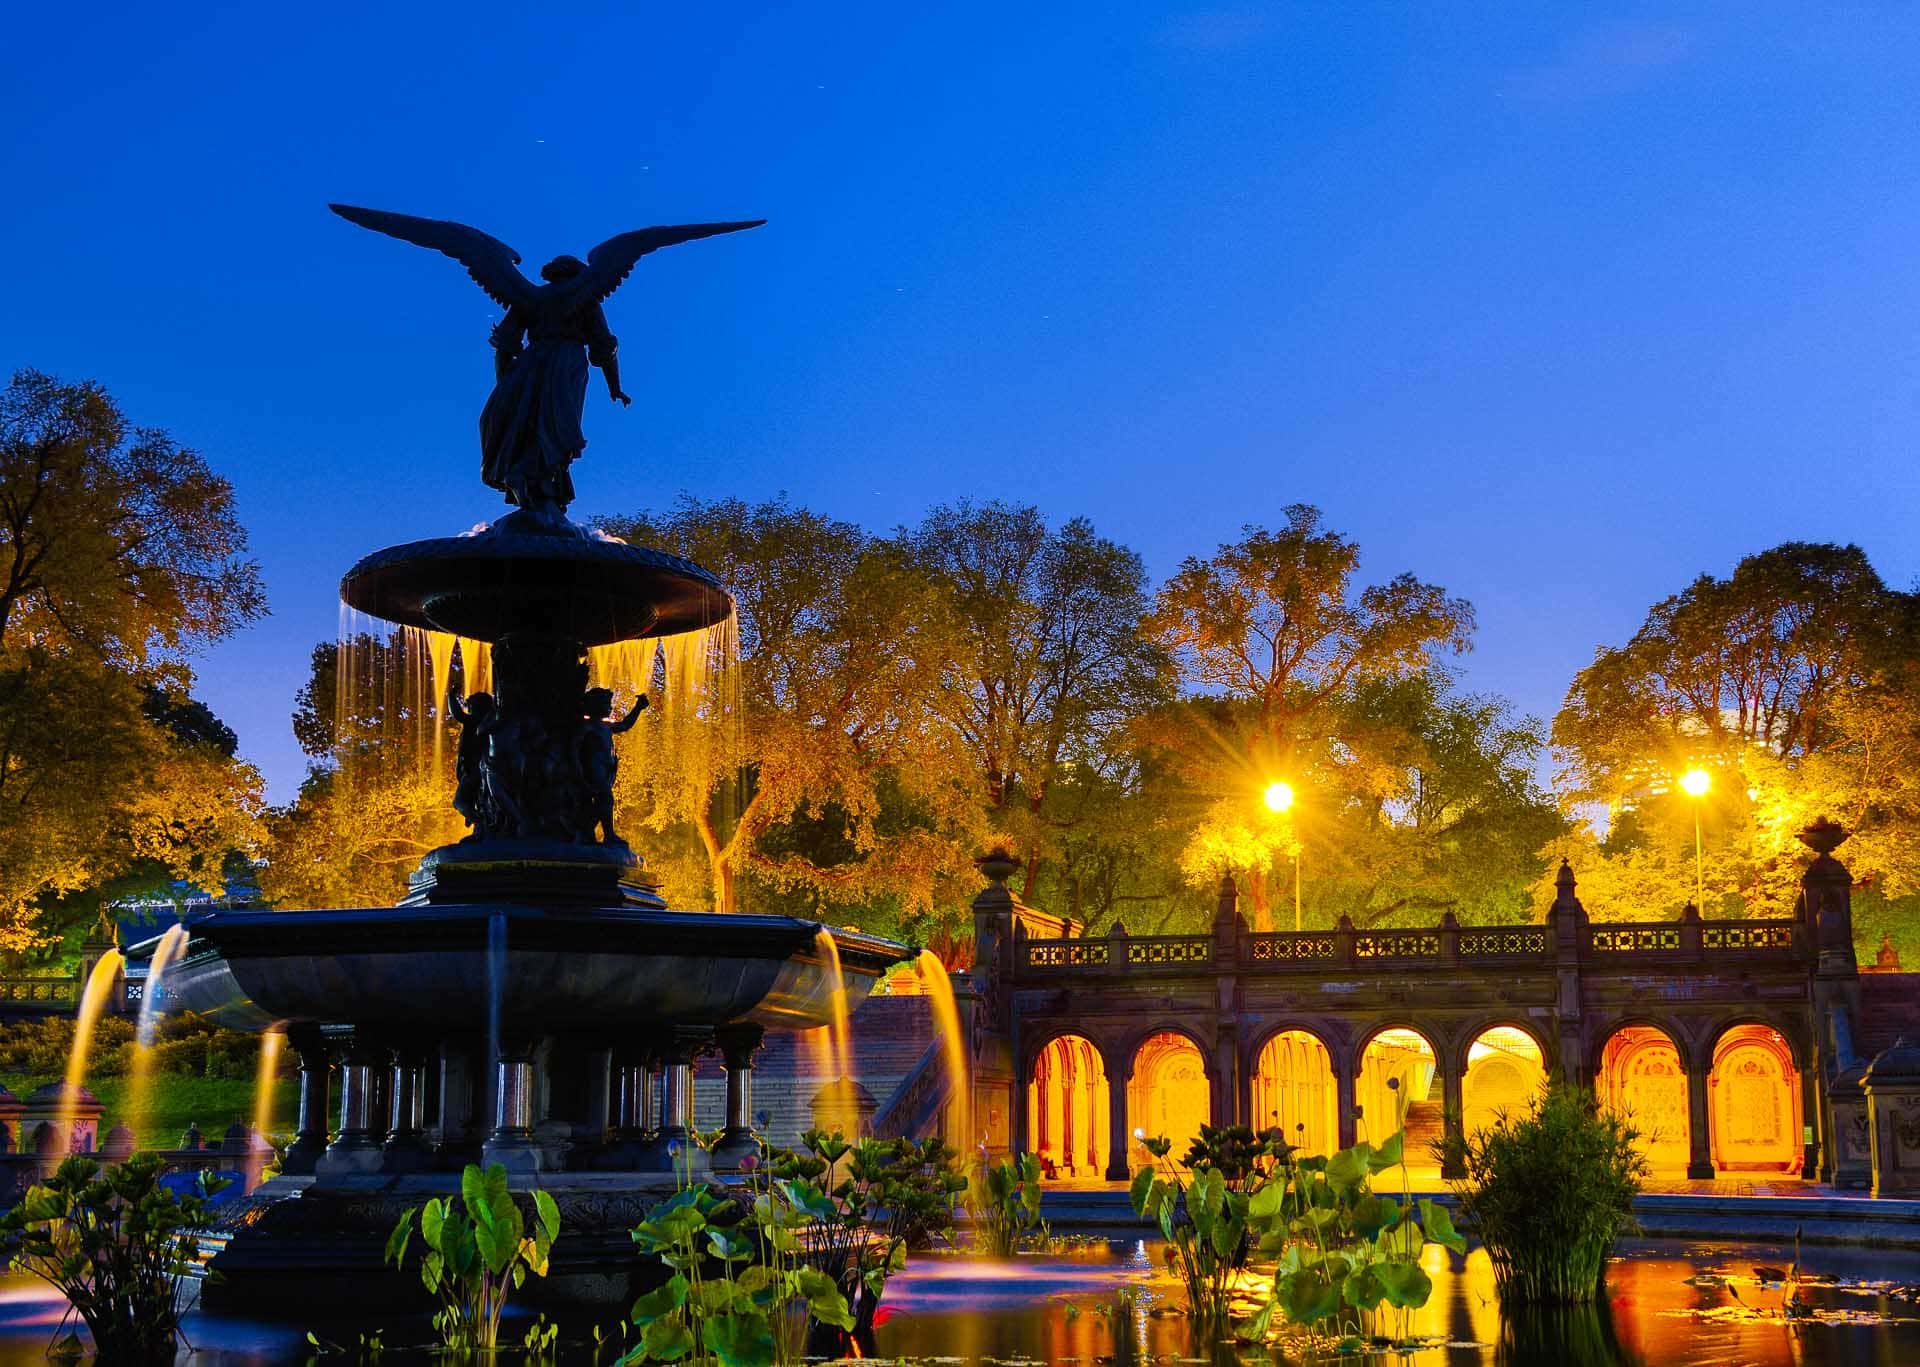 Bethesda Fountain at night in New York City's Central Park